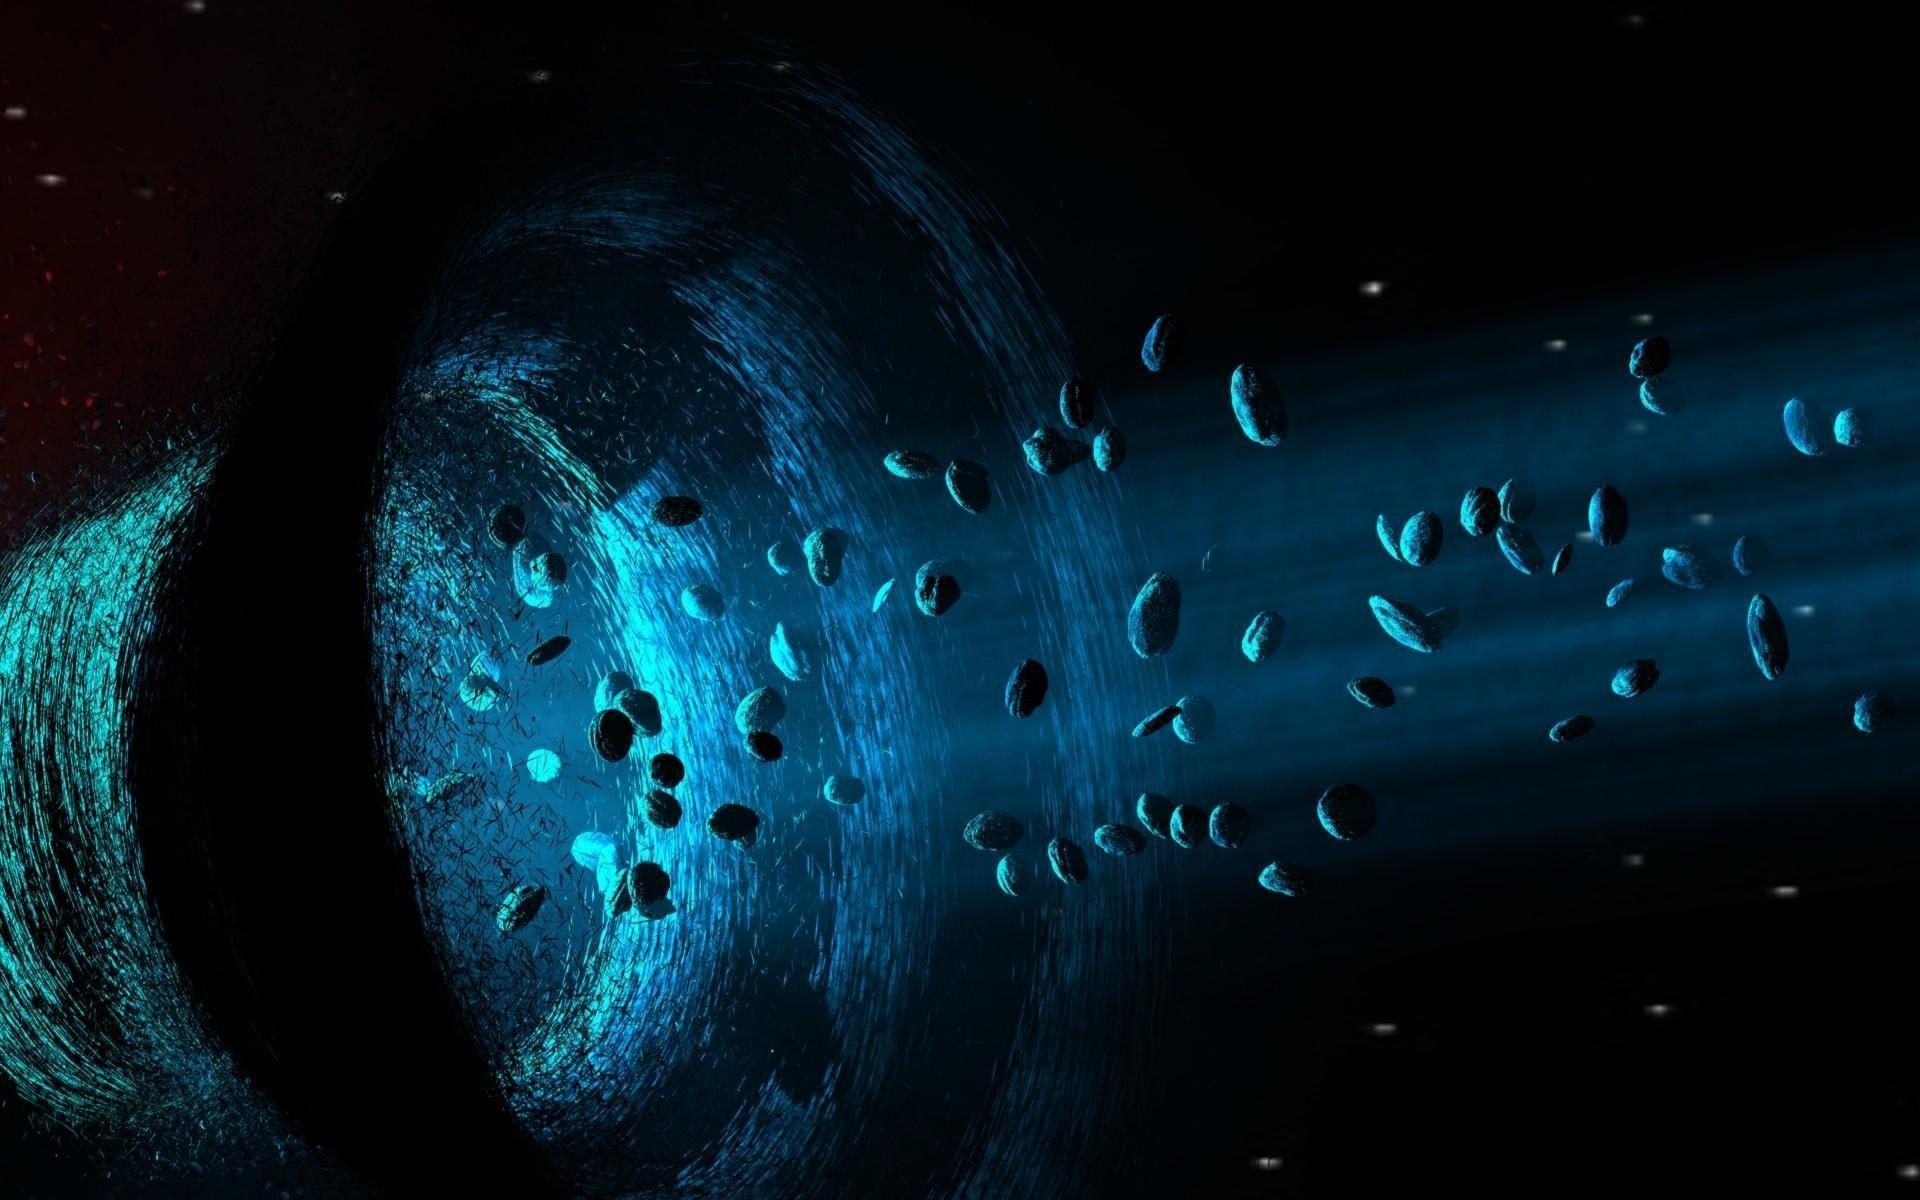 Asteroids Black Hole Funnel Light wallpapers.